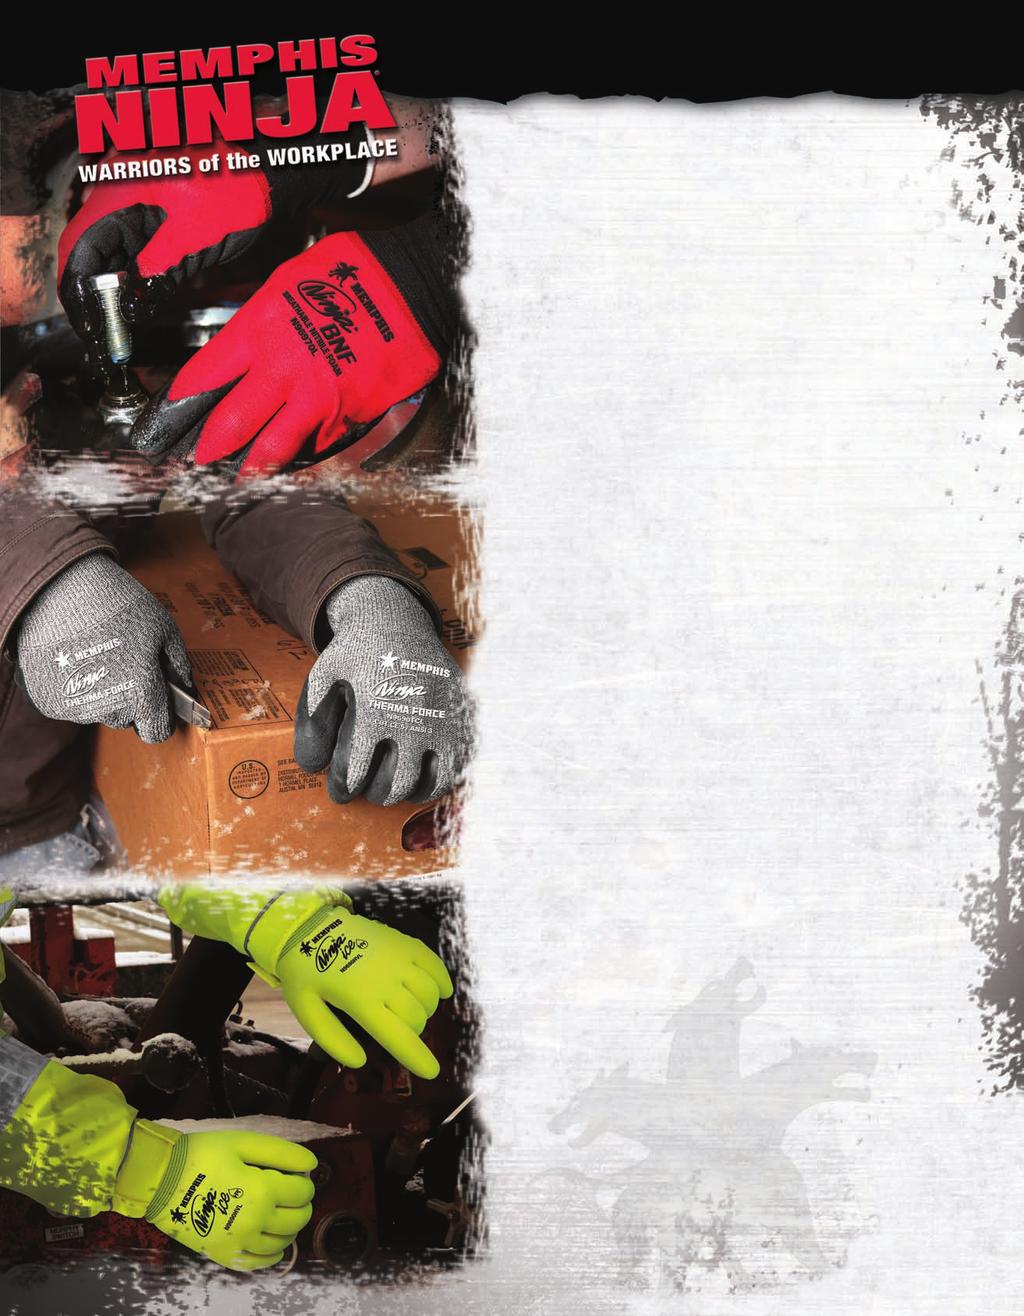 1 Ninja Catalog_JNINJA_05-15-v4c_Layout 1 5/26/15 10:04 AM Page 8 Your Glove Solutions Multi-Purpose Our Memphis Ninja series is engineered to provide the highest level of innovation.